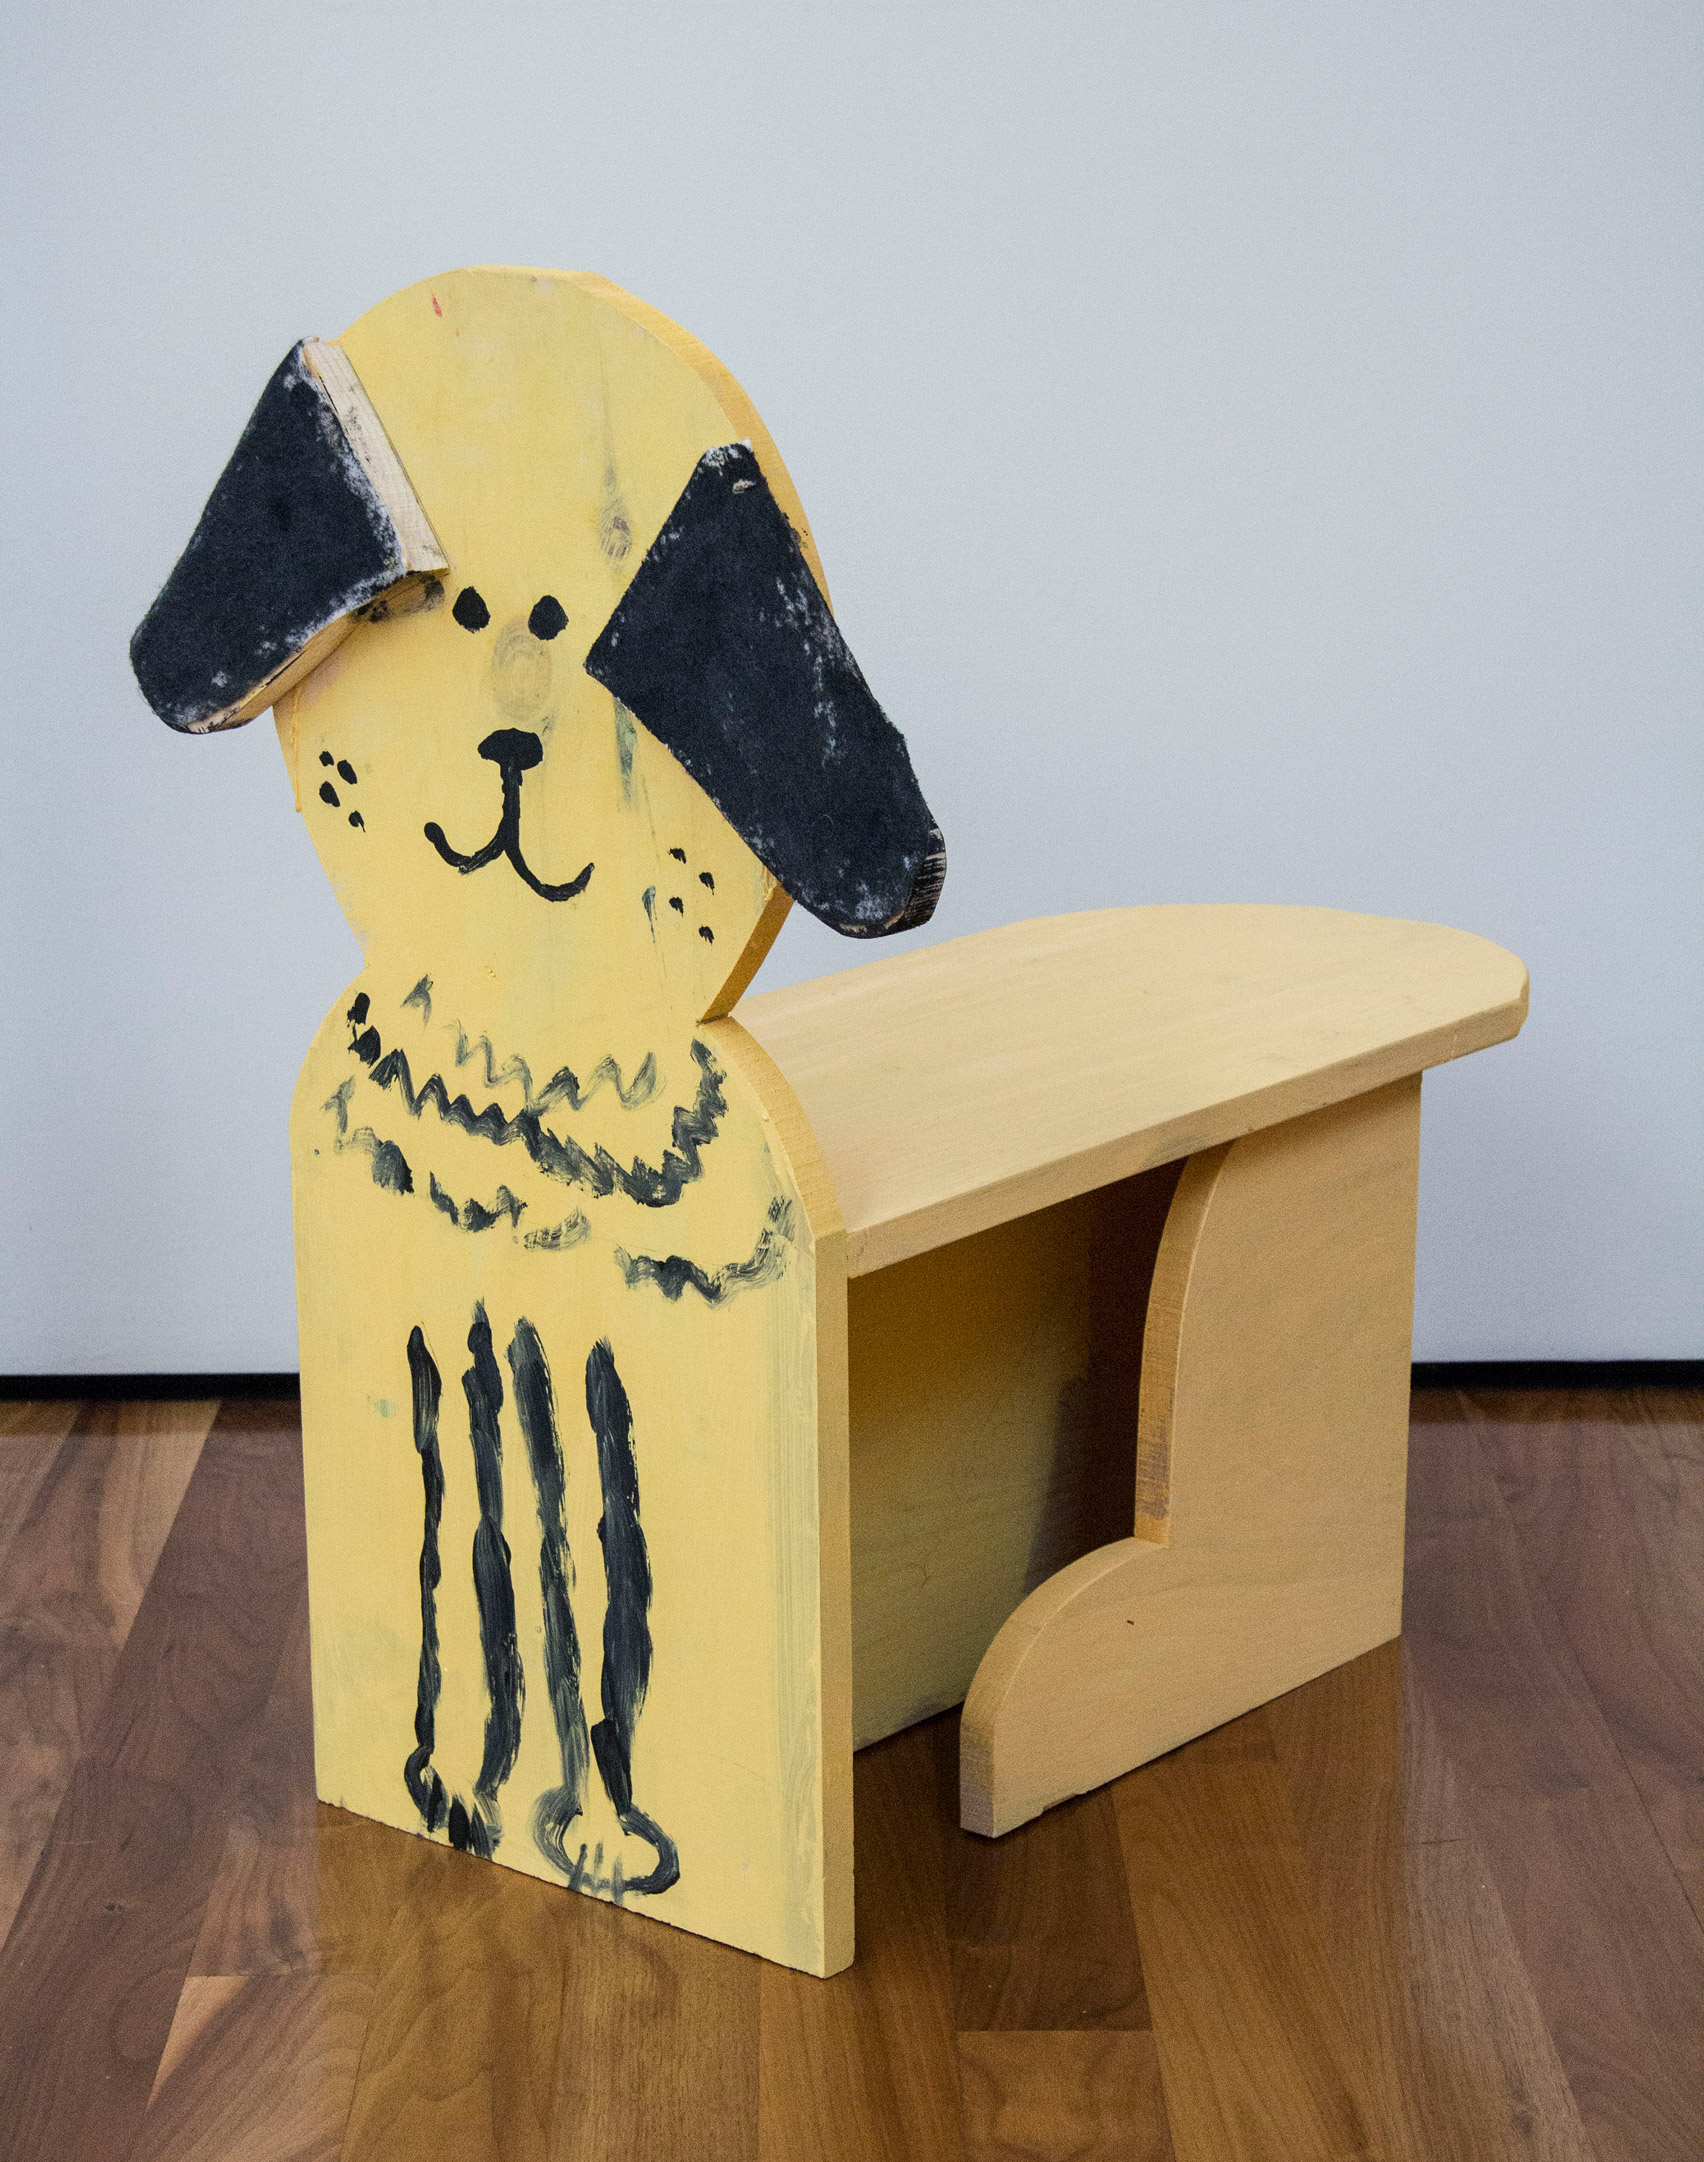 Dog-shaped chair from Grade Three Chairs project by Bruce Edelstein at Trinity School